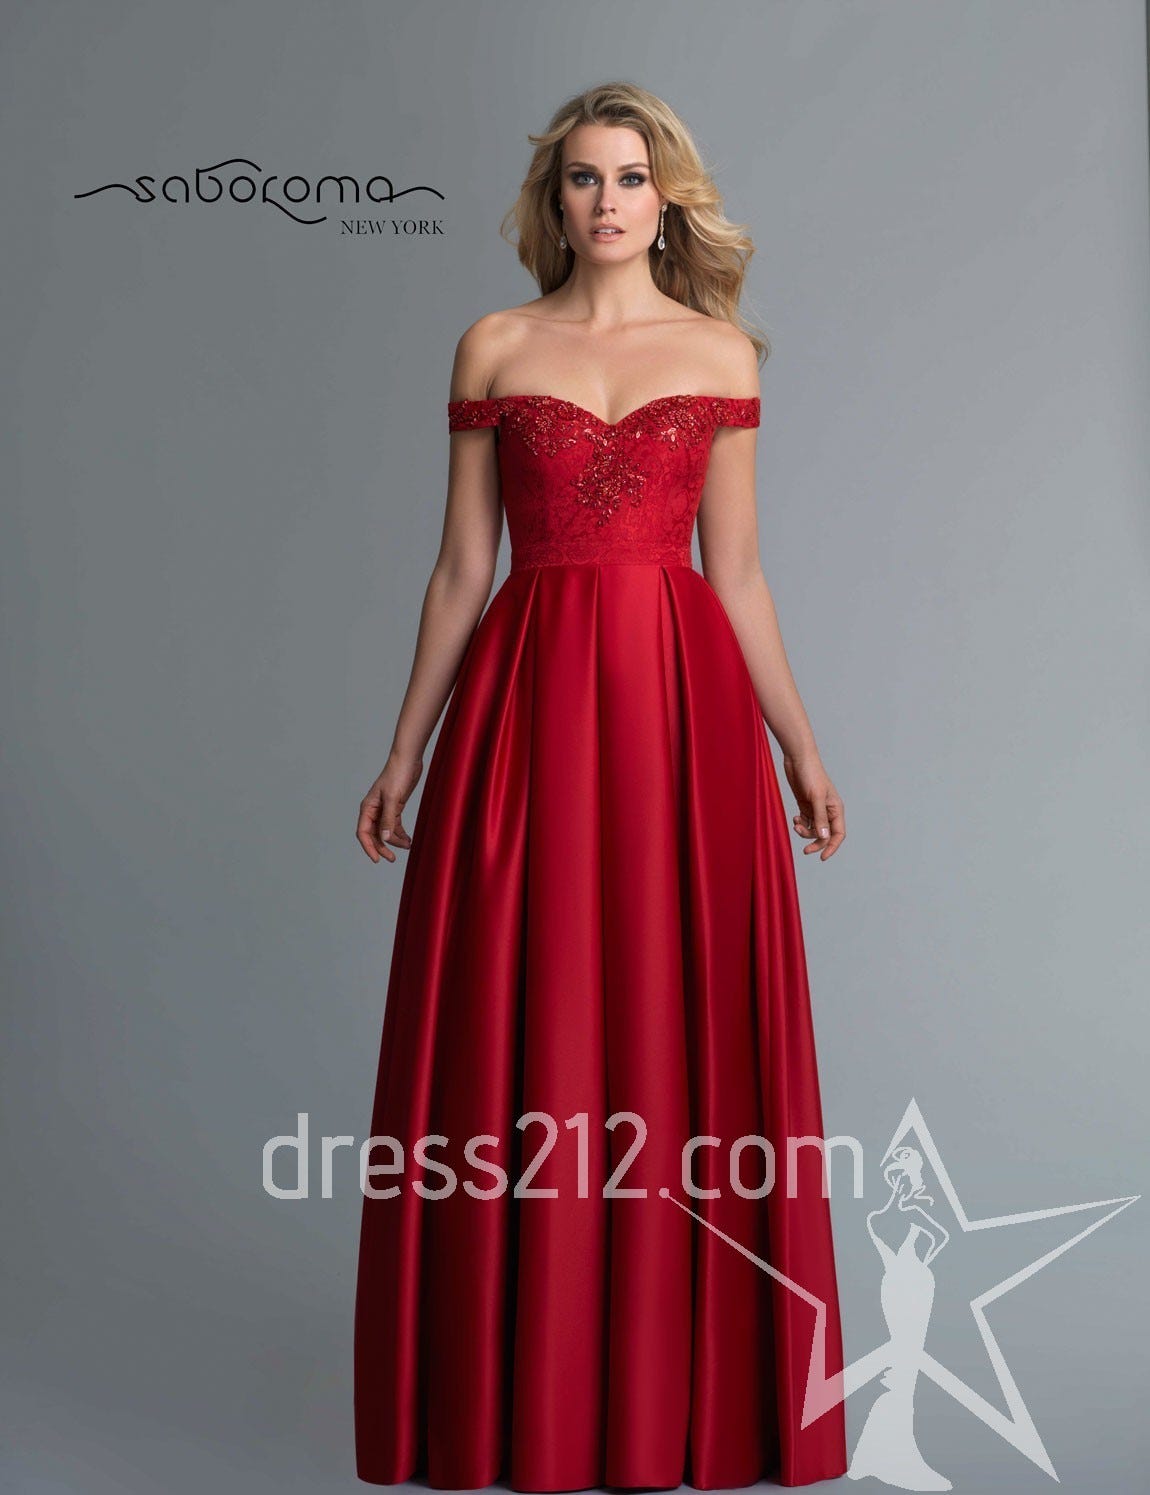 designer ball gowns on sale